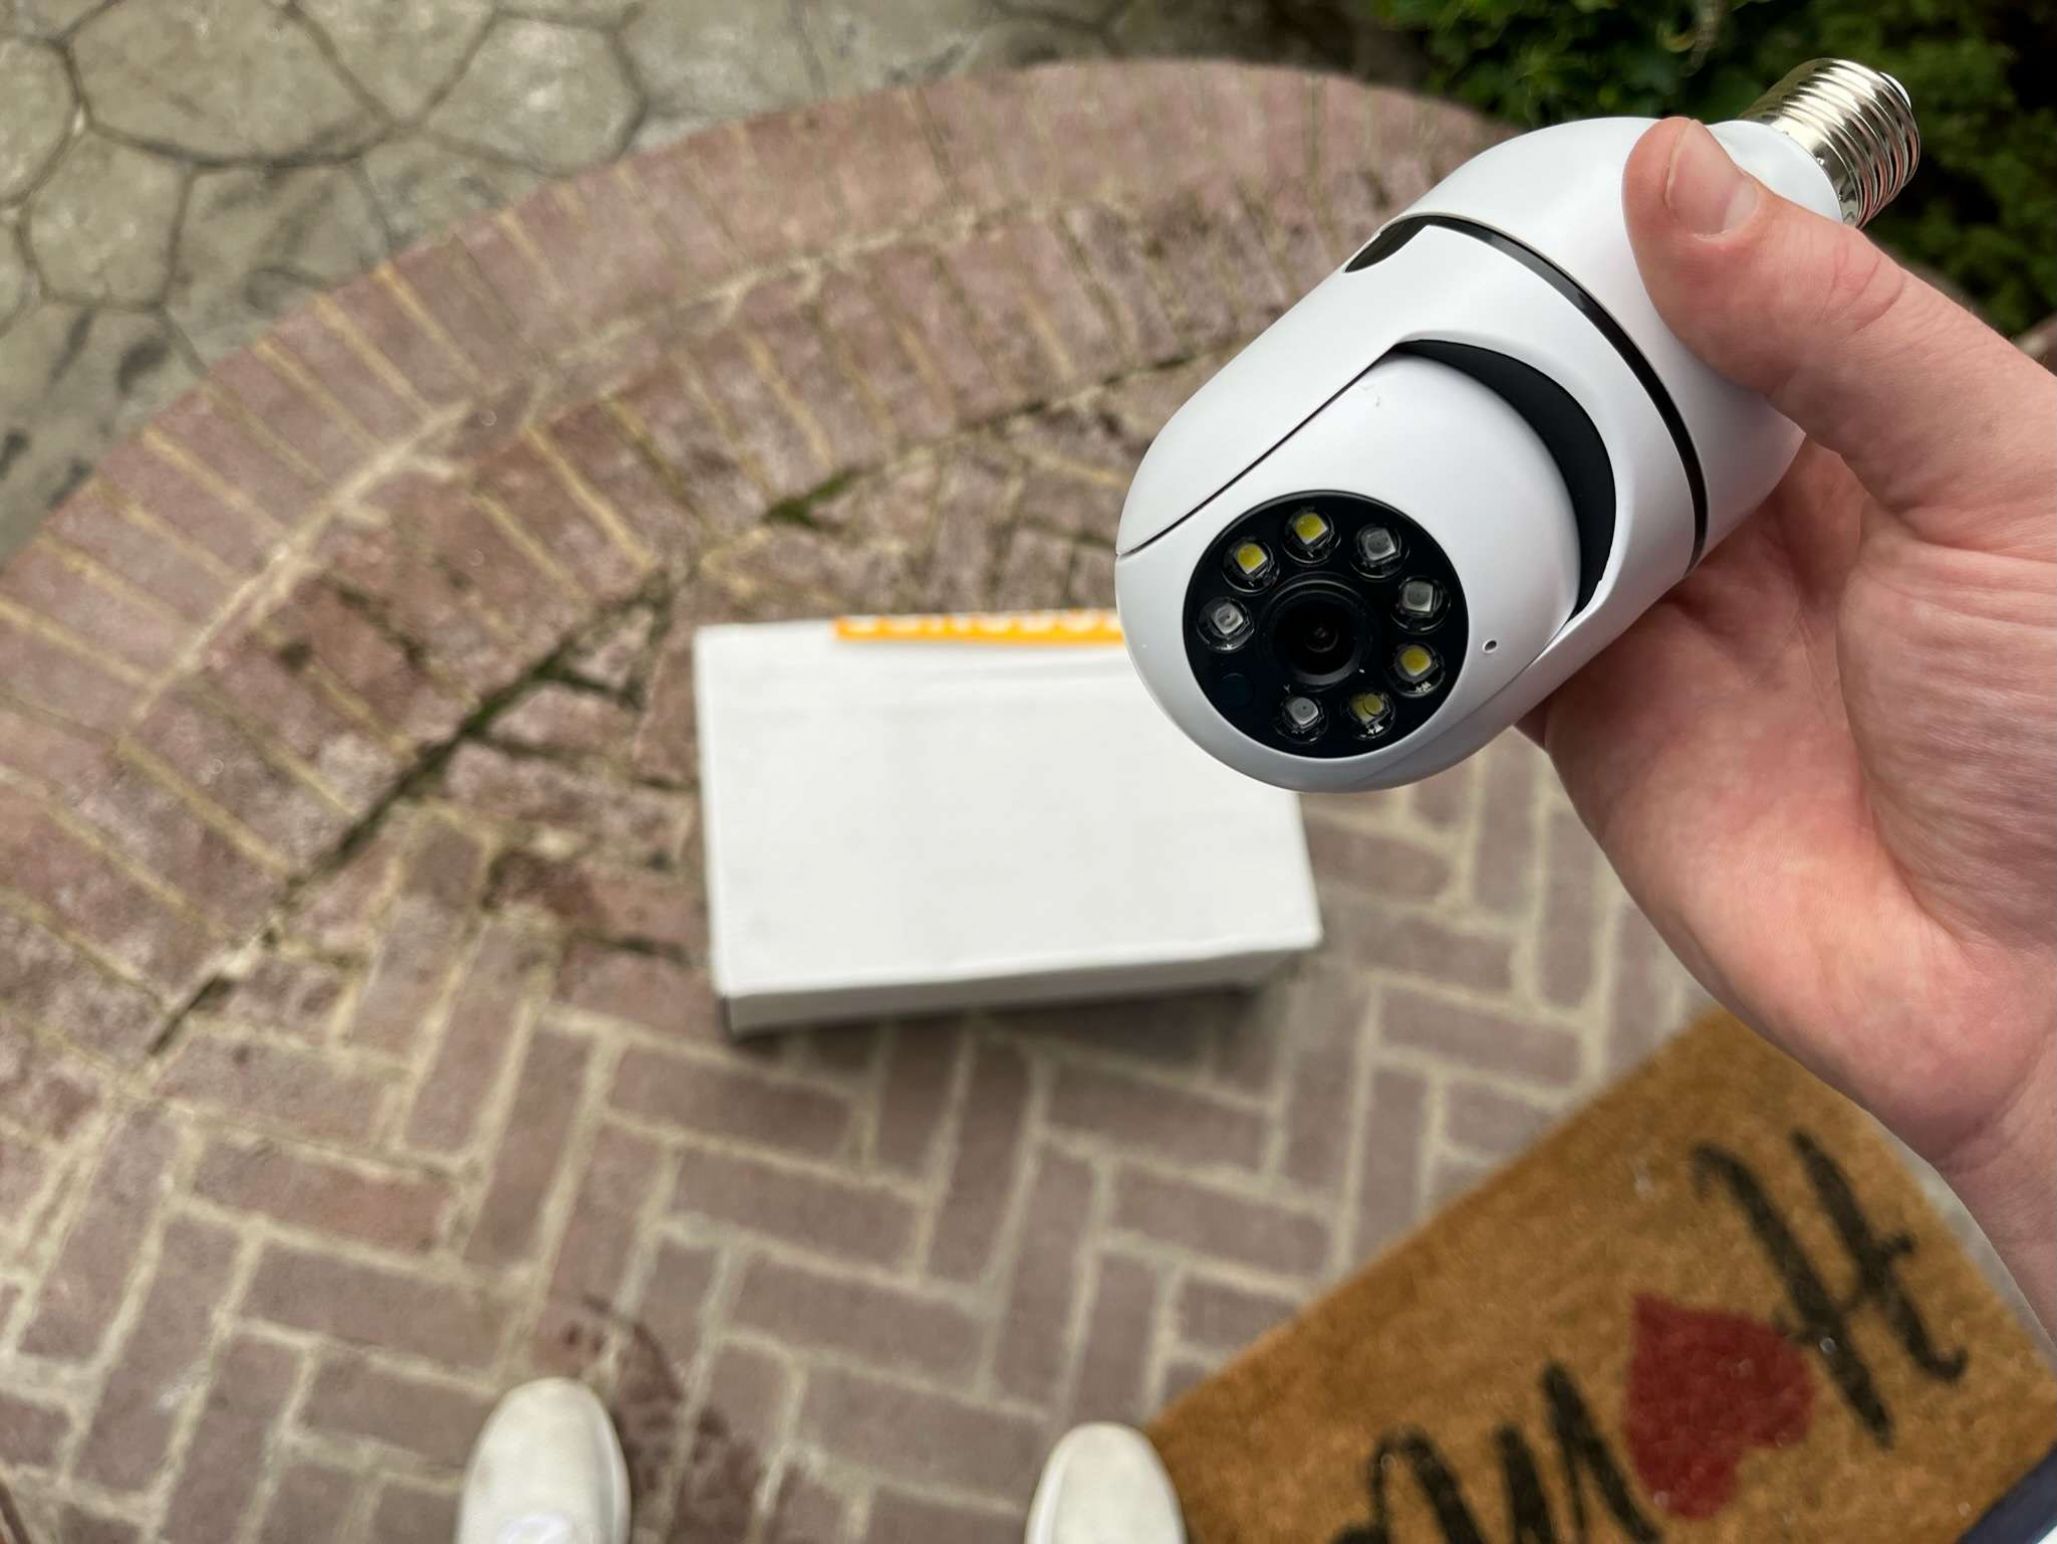 Buy Nomad Security Camera With Credit Card